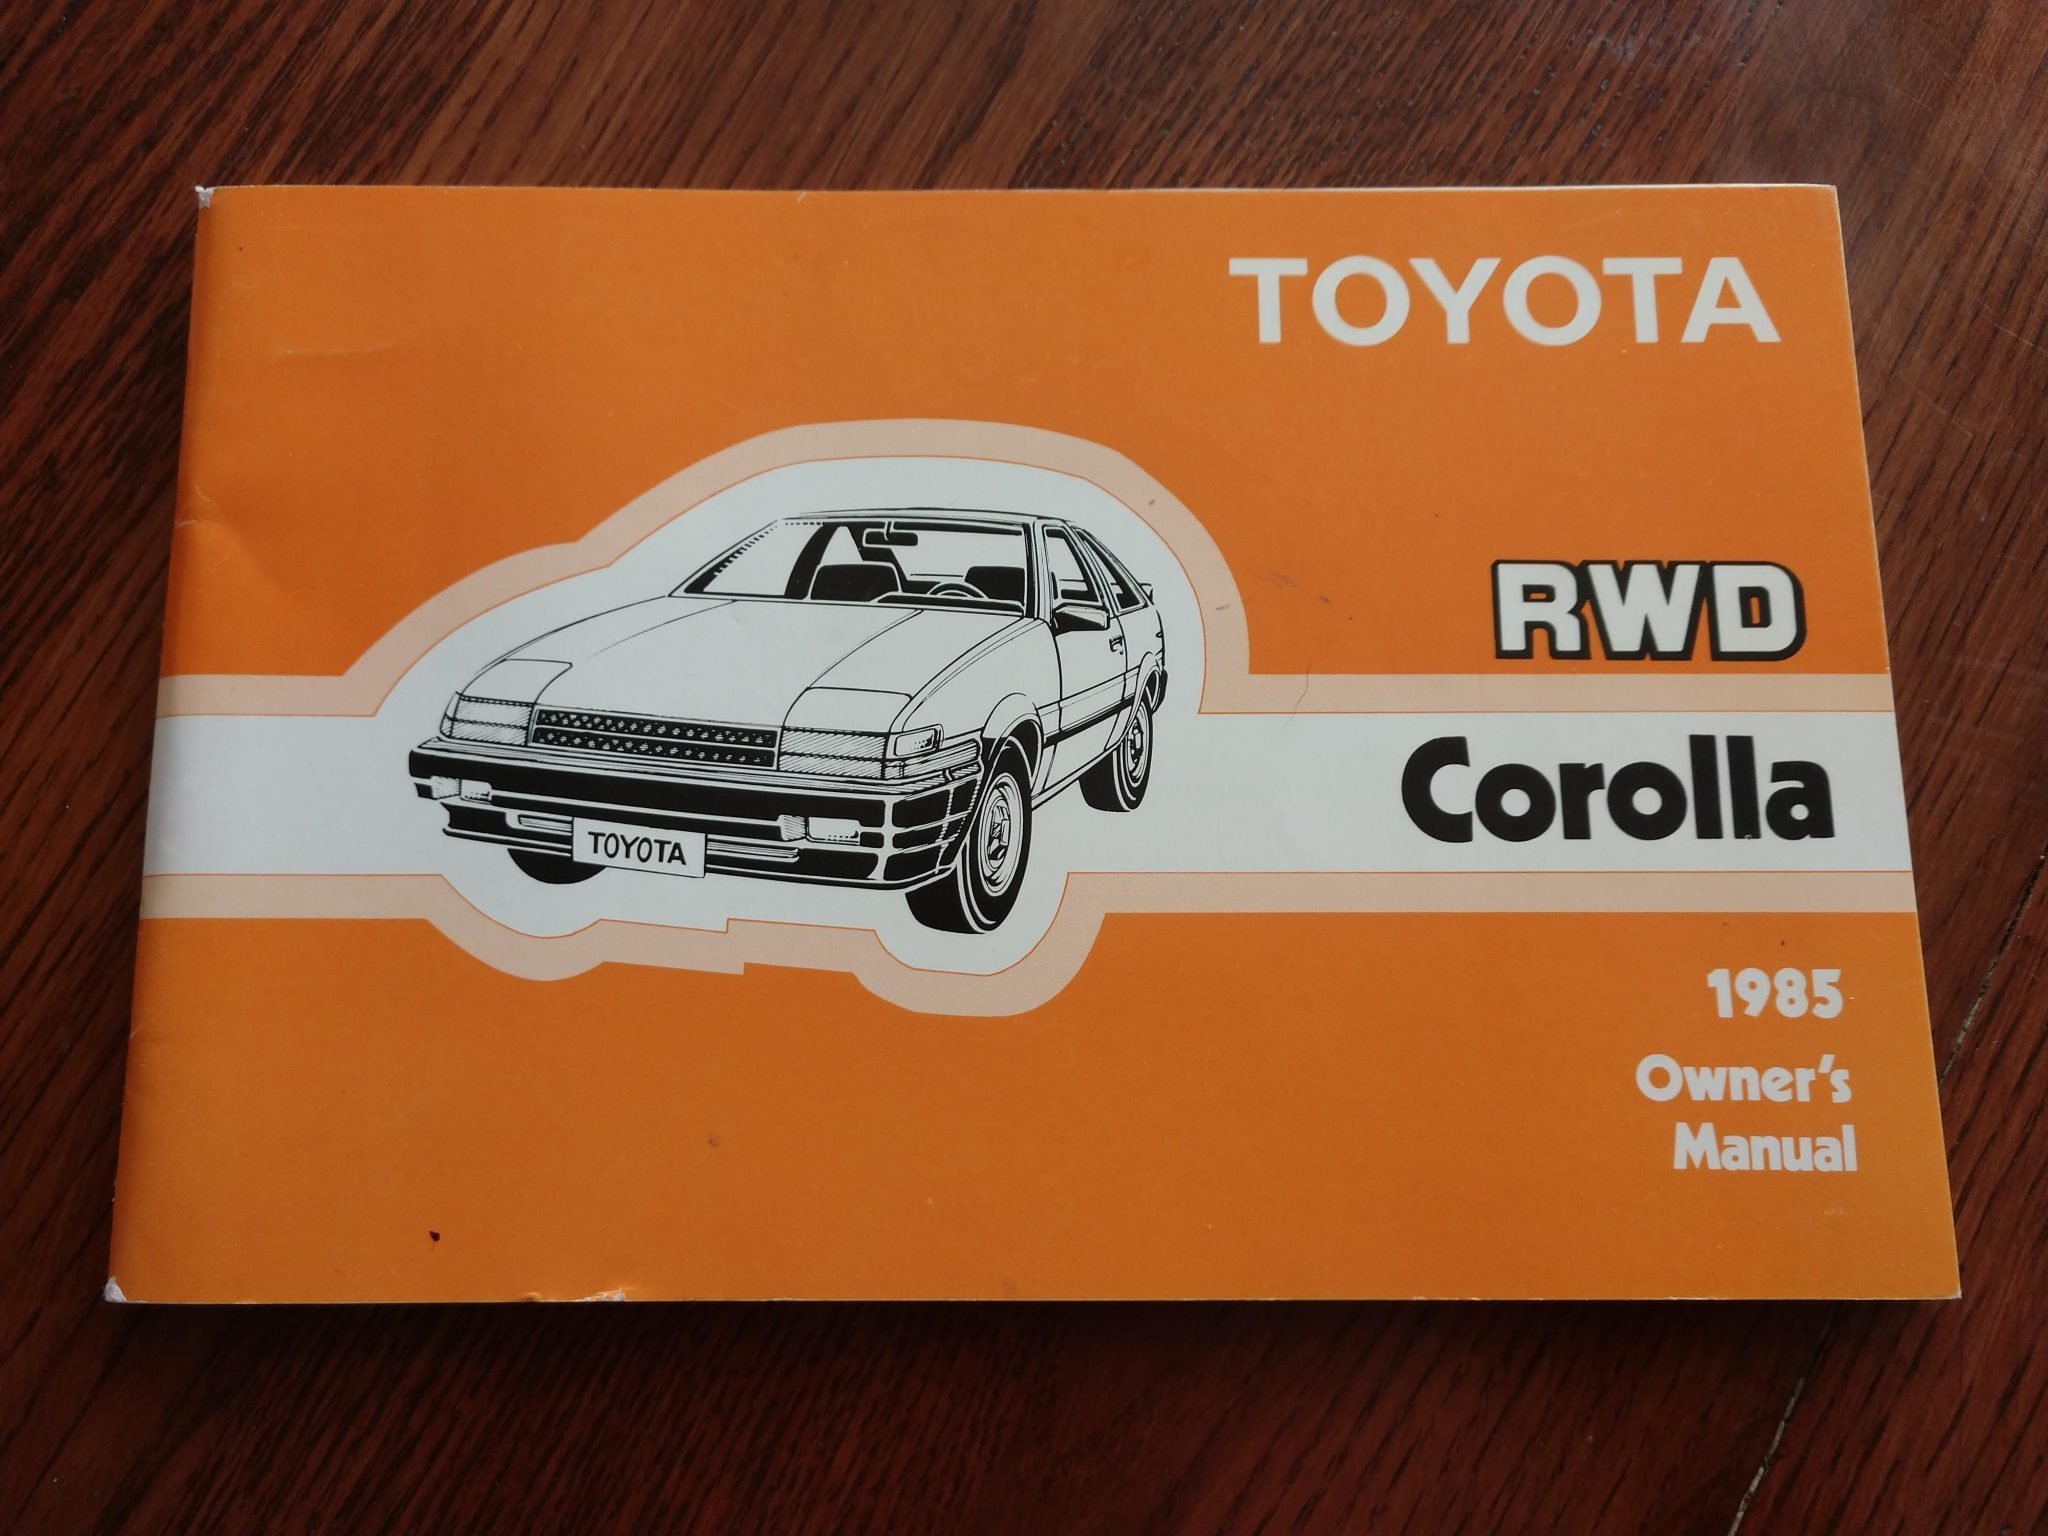 A 1985 Toyota Corolla GT-S Sold for $40,000 on Bring a Trailer